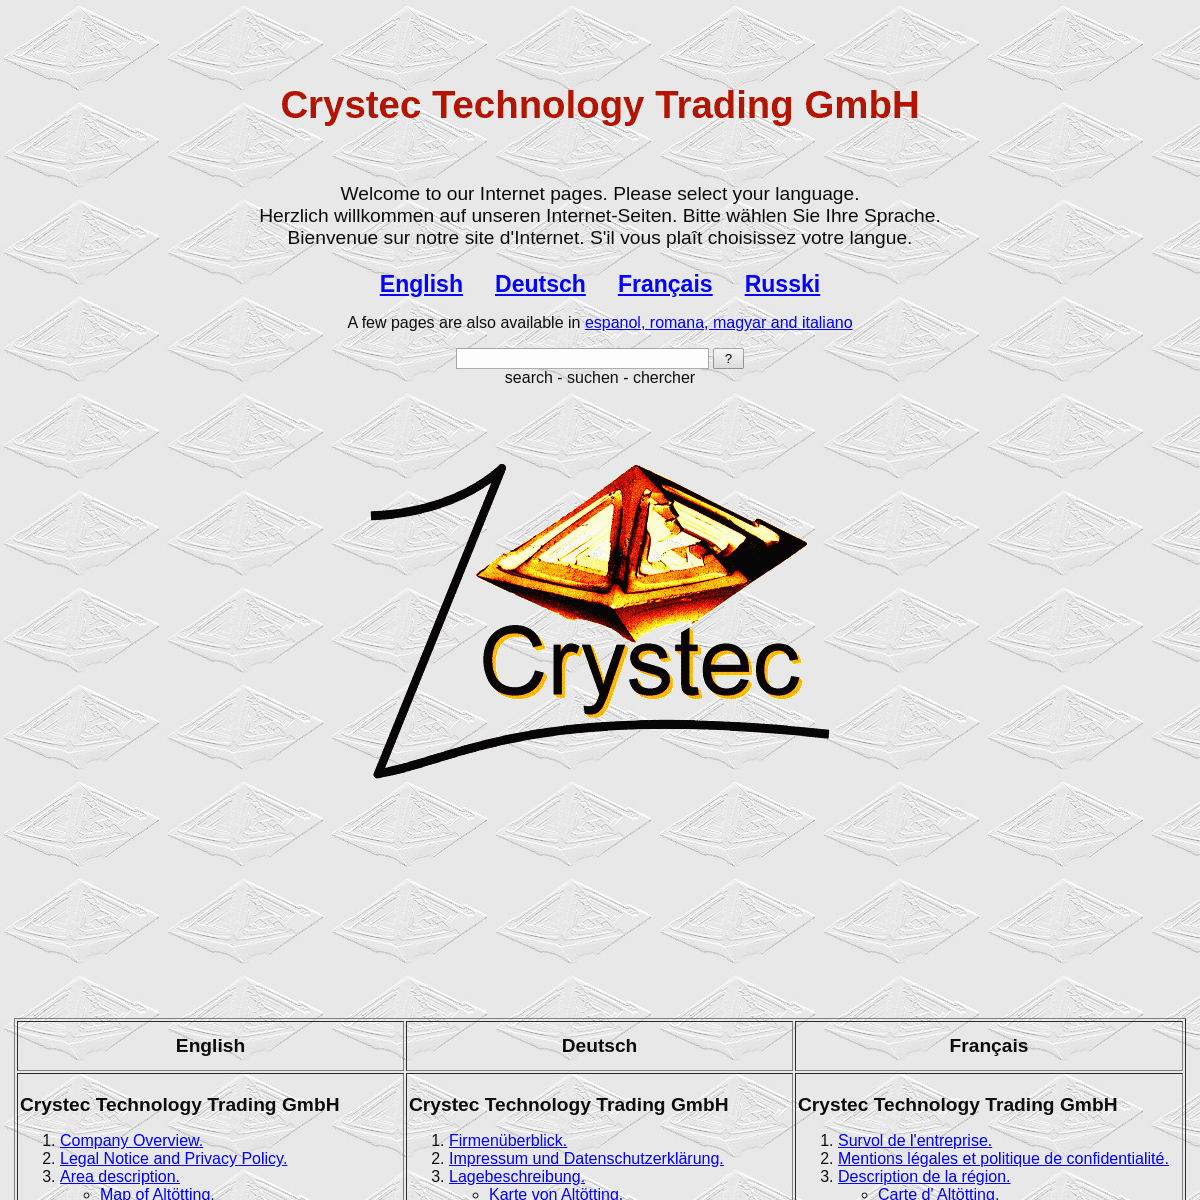 A complete backup of crystec.com